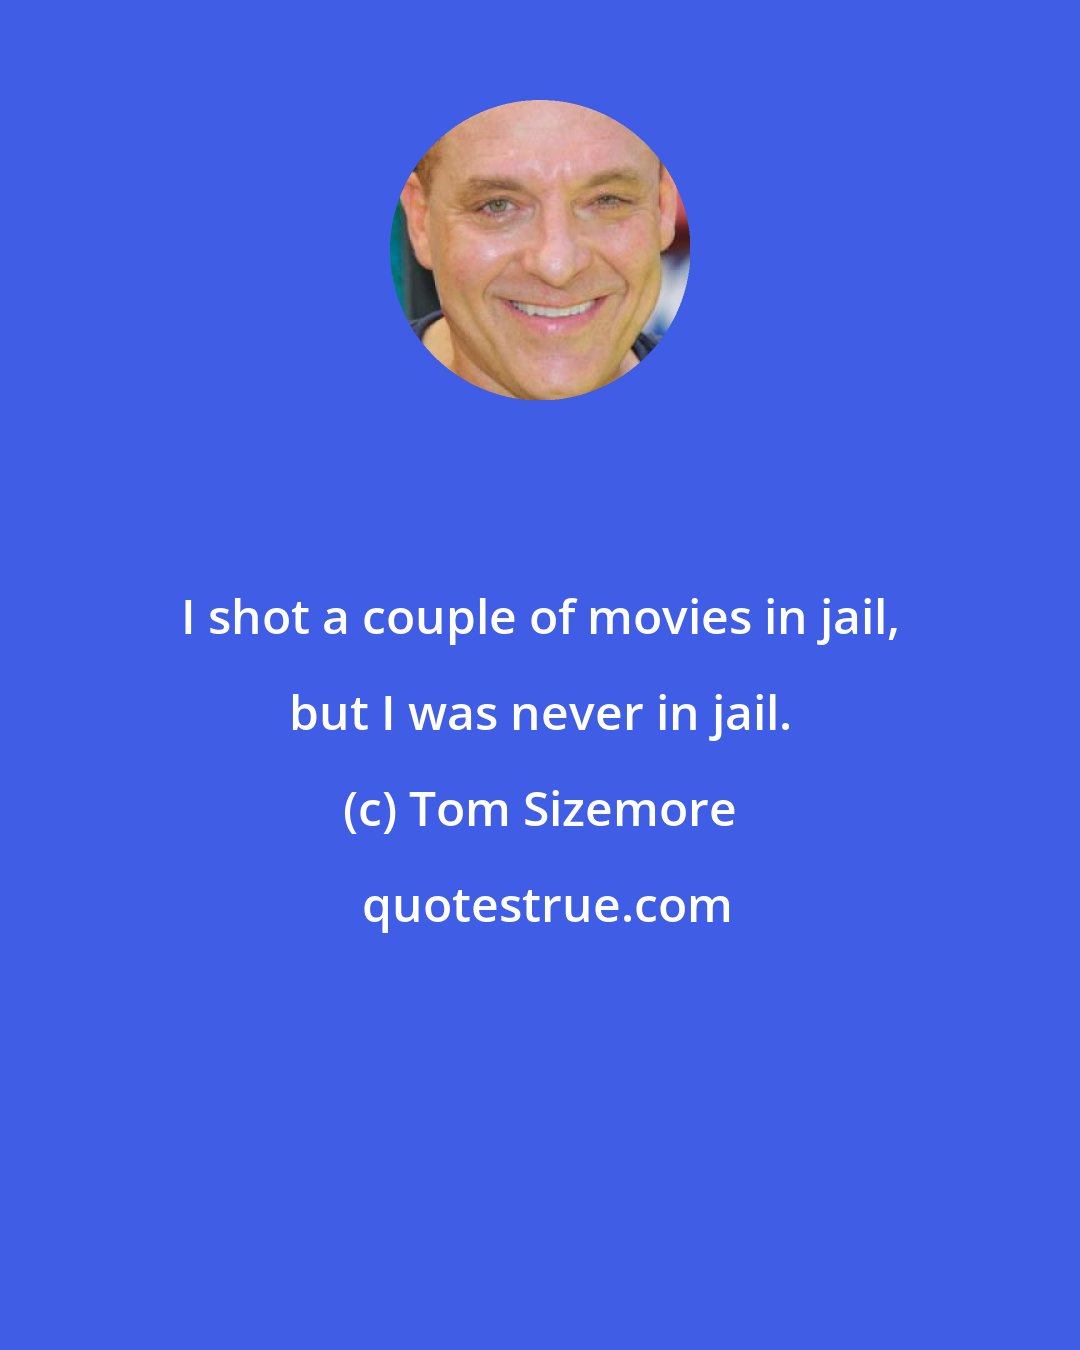 Tom Sizemore: I shot a couple of movies in jail, but I was never in jail.